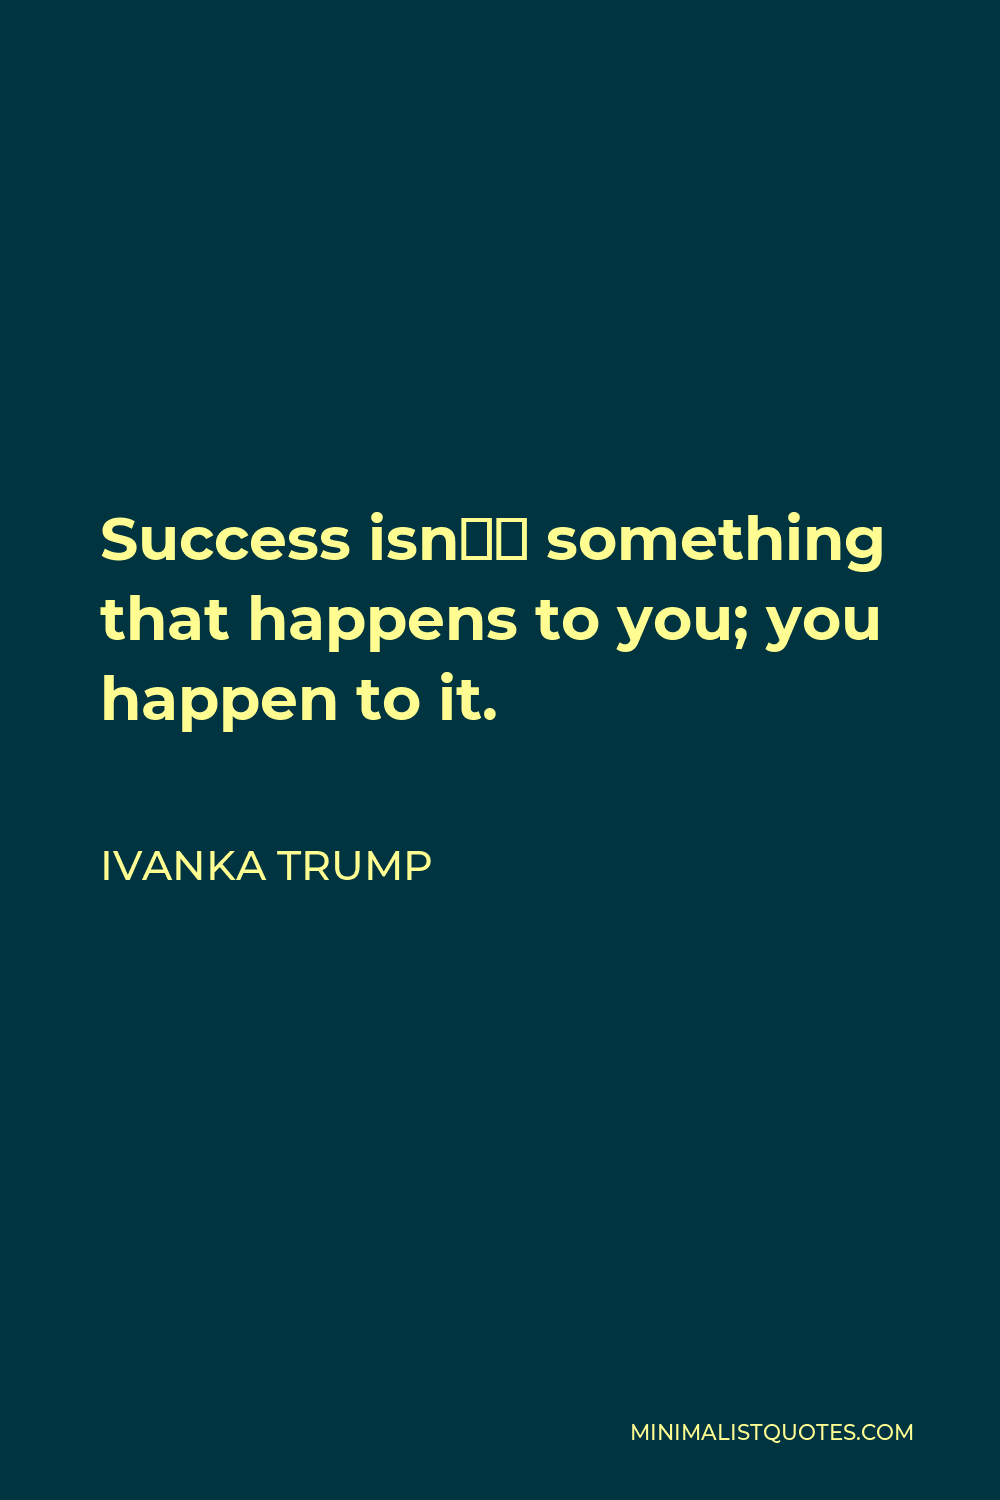 Ivanka Trump Quote - Success isn’t something that happens to you; you happen to it.